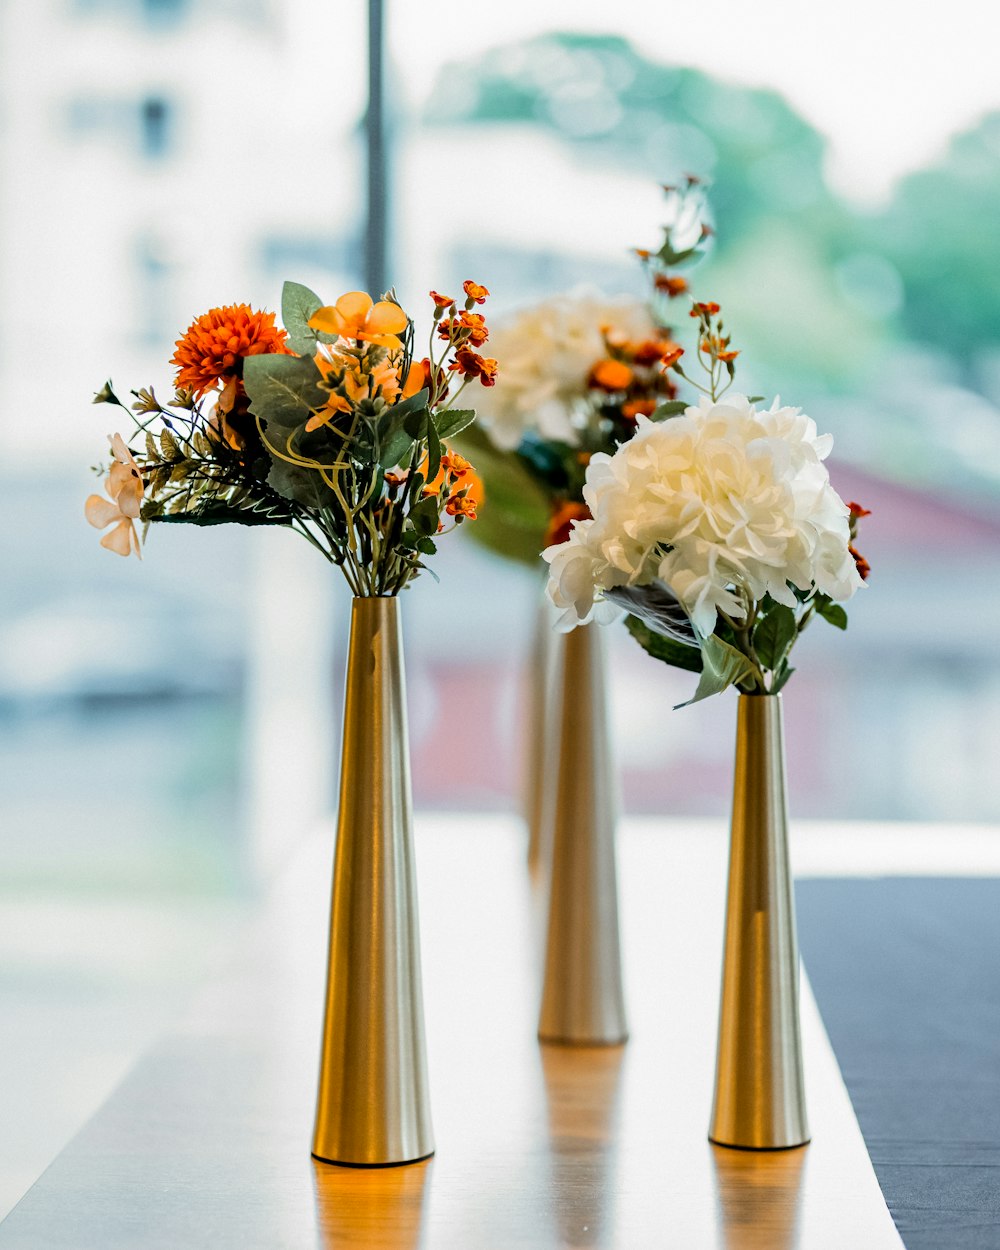 three gold vases with flowers in them on a table